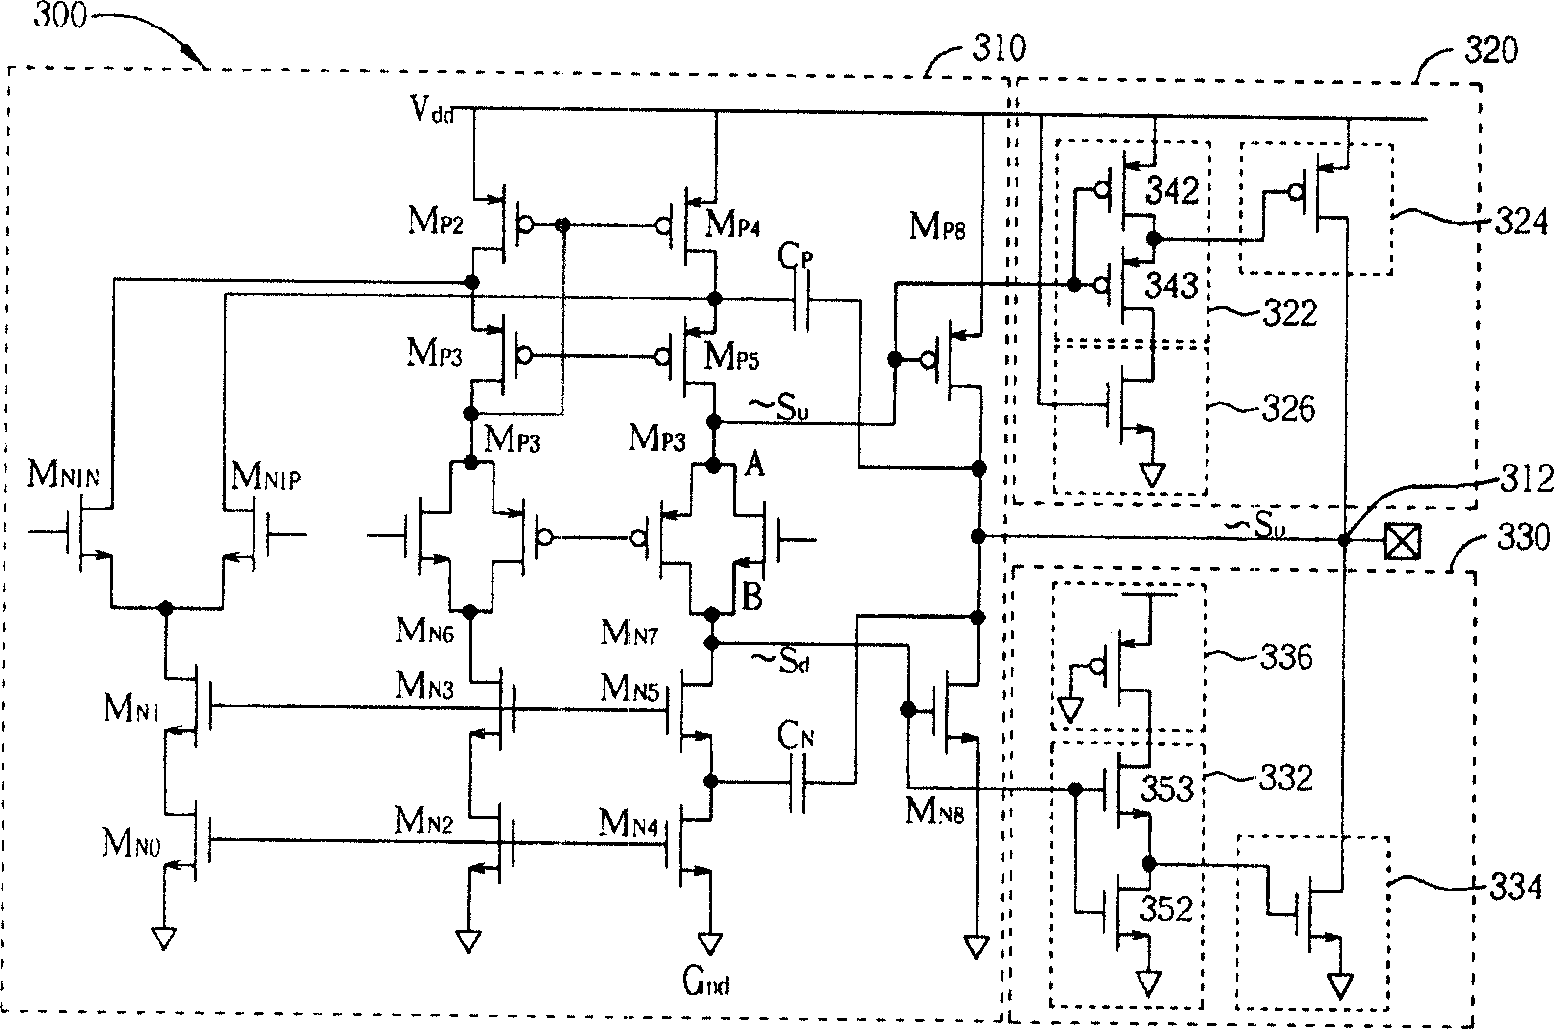 Amplifying circuit with pull-up and pull-down circuit to increase turning rate